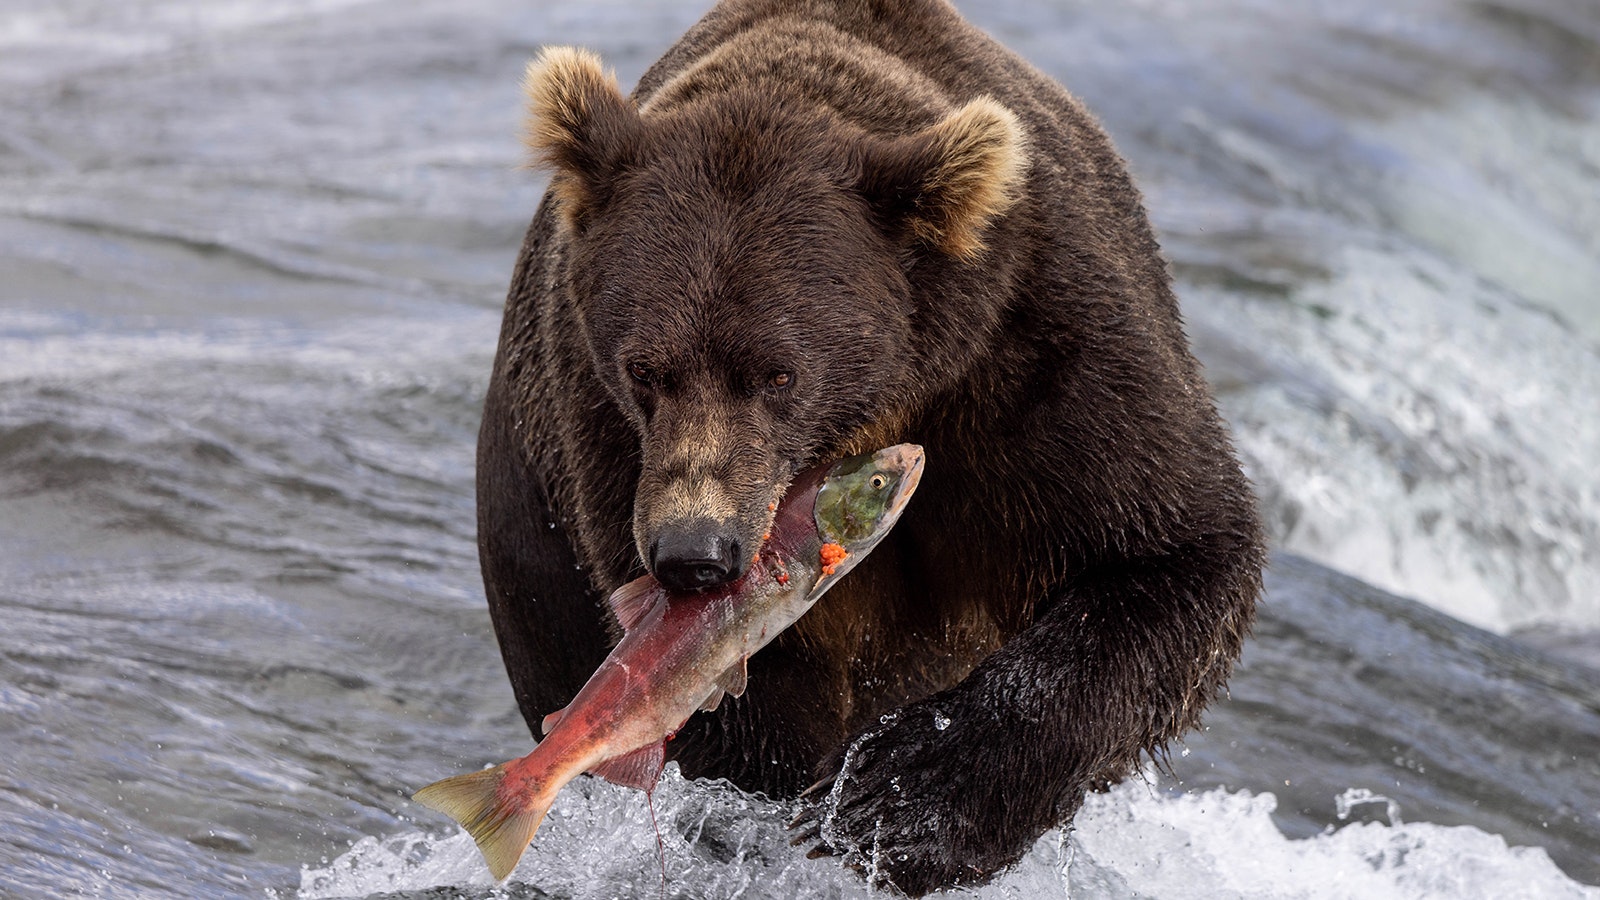 A brown bear in Katmai National Park walking through the Brooks River with a sockeye salmon after a successful catch. This bear had been fishing unsuccessfully for quite a while before he finally caught a fish and proudly carried it to shore to eat before returning to his fishing spot.